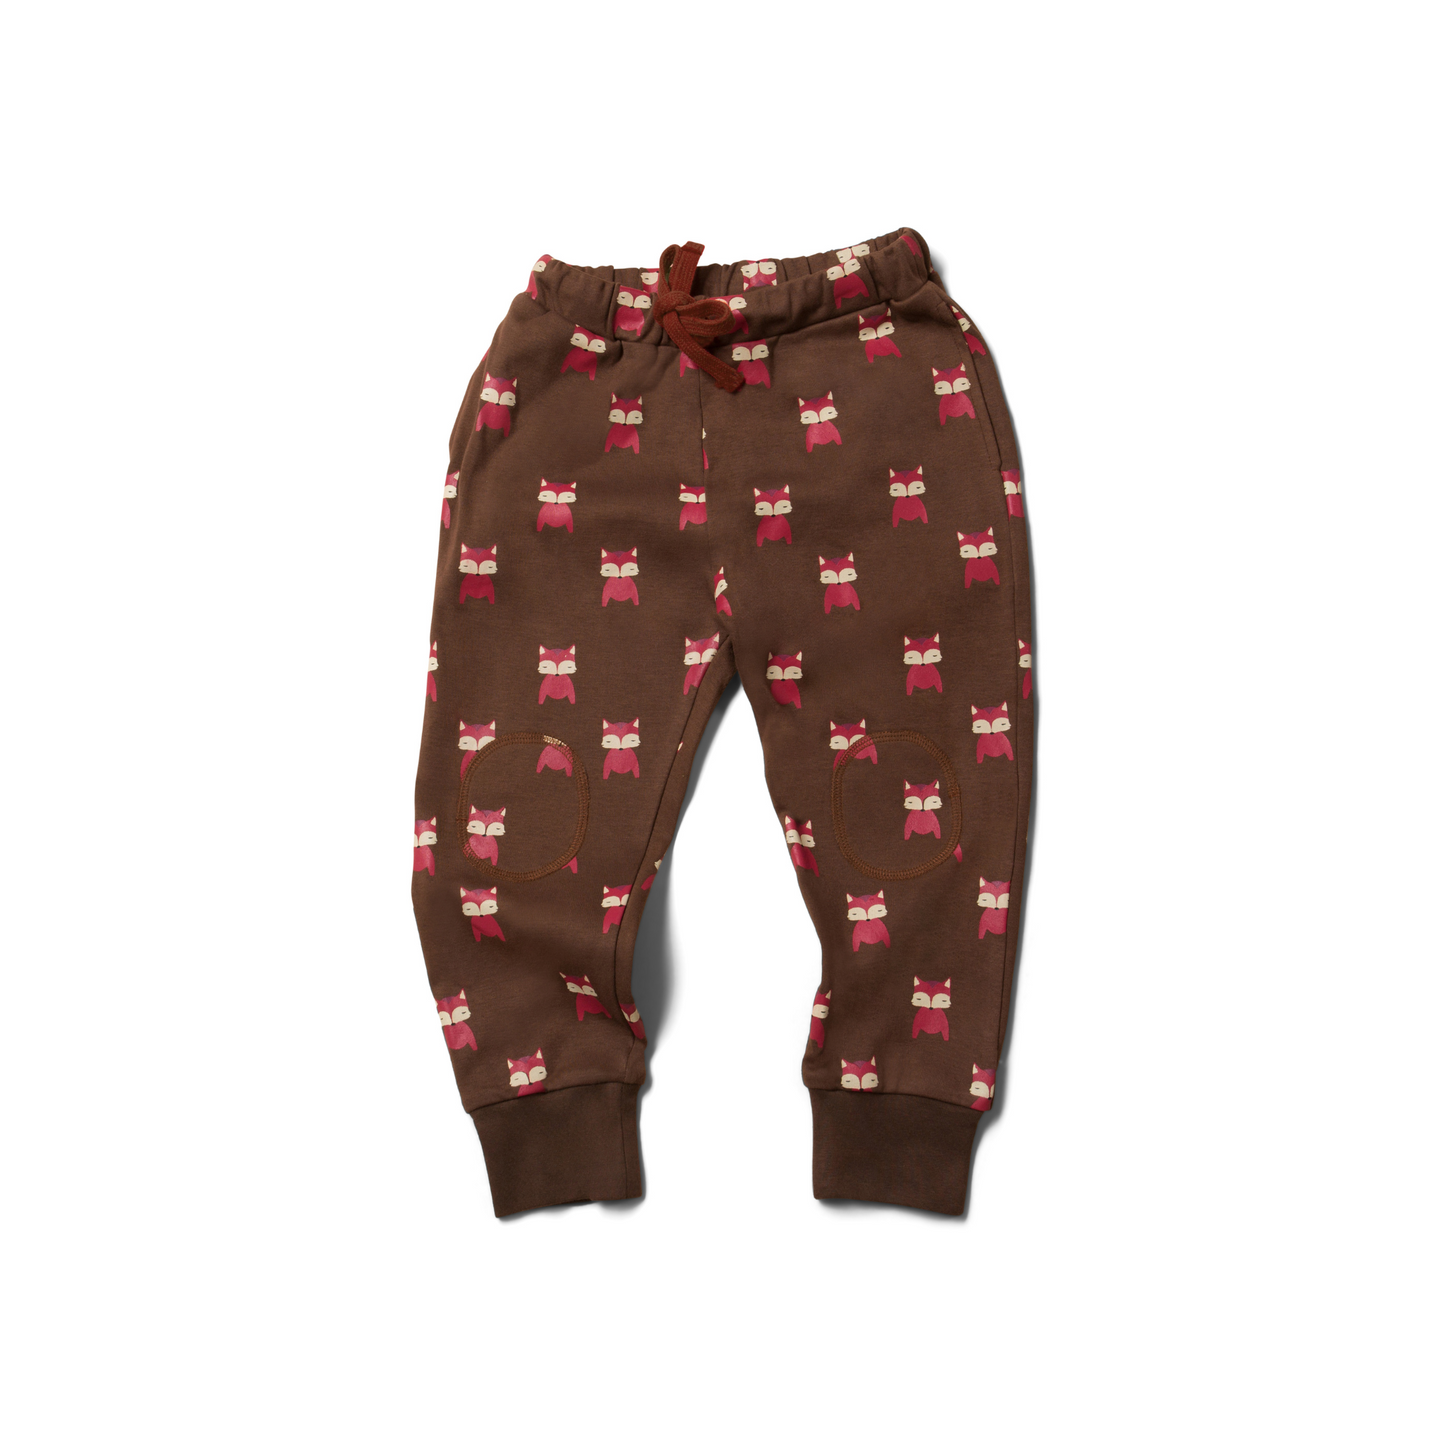 Autumn foxes cosy joggers